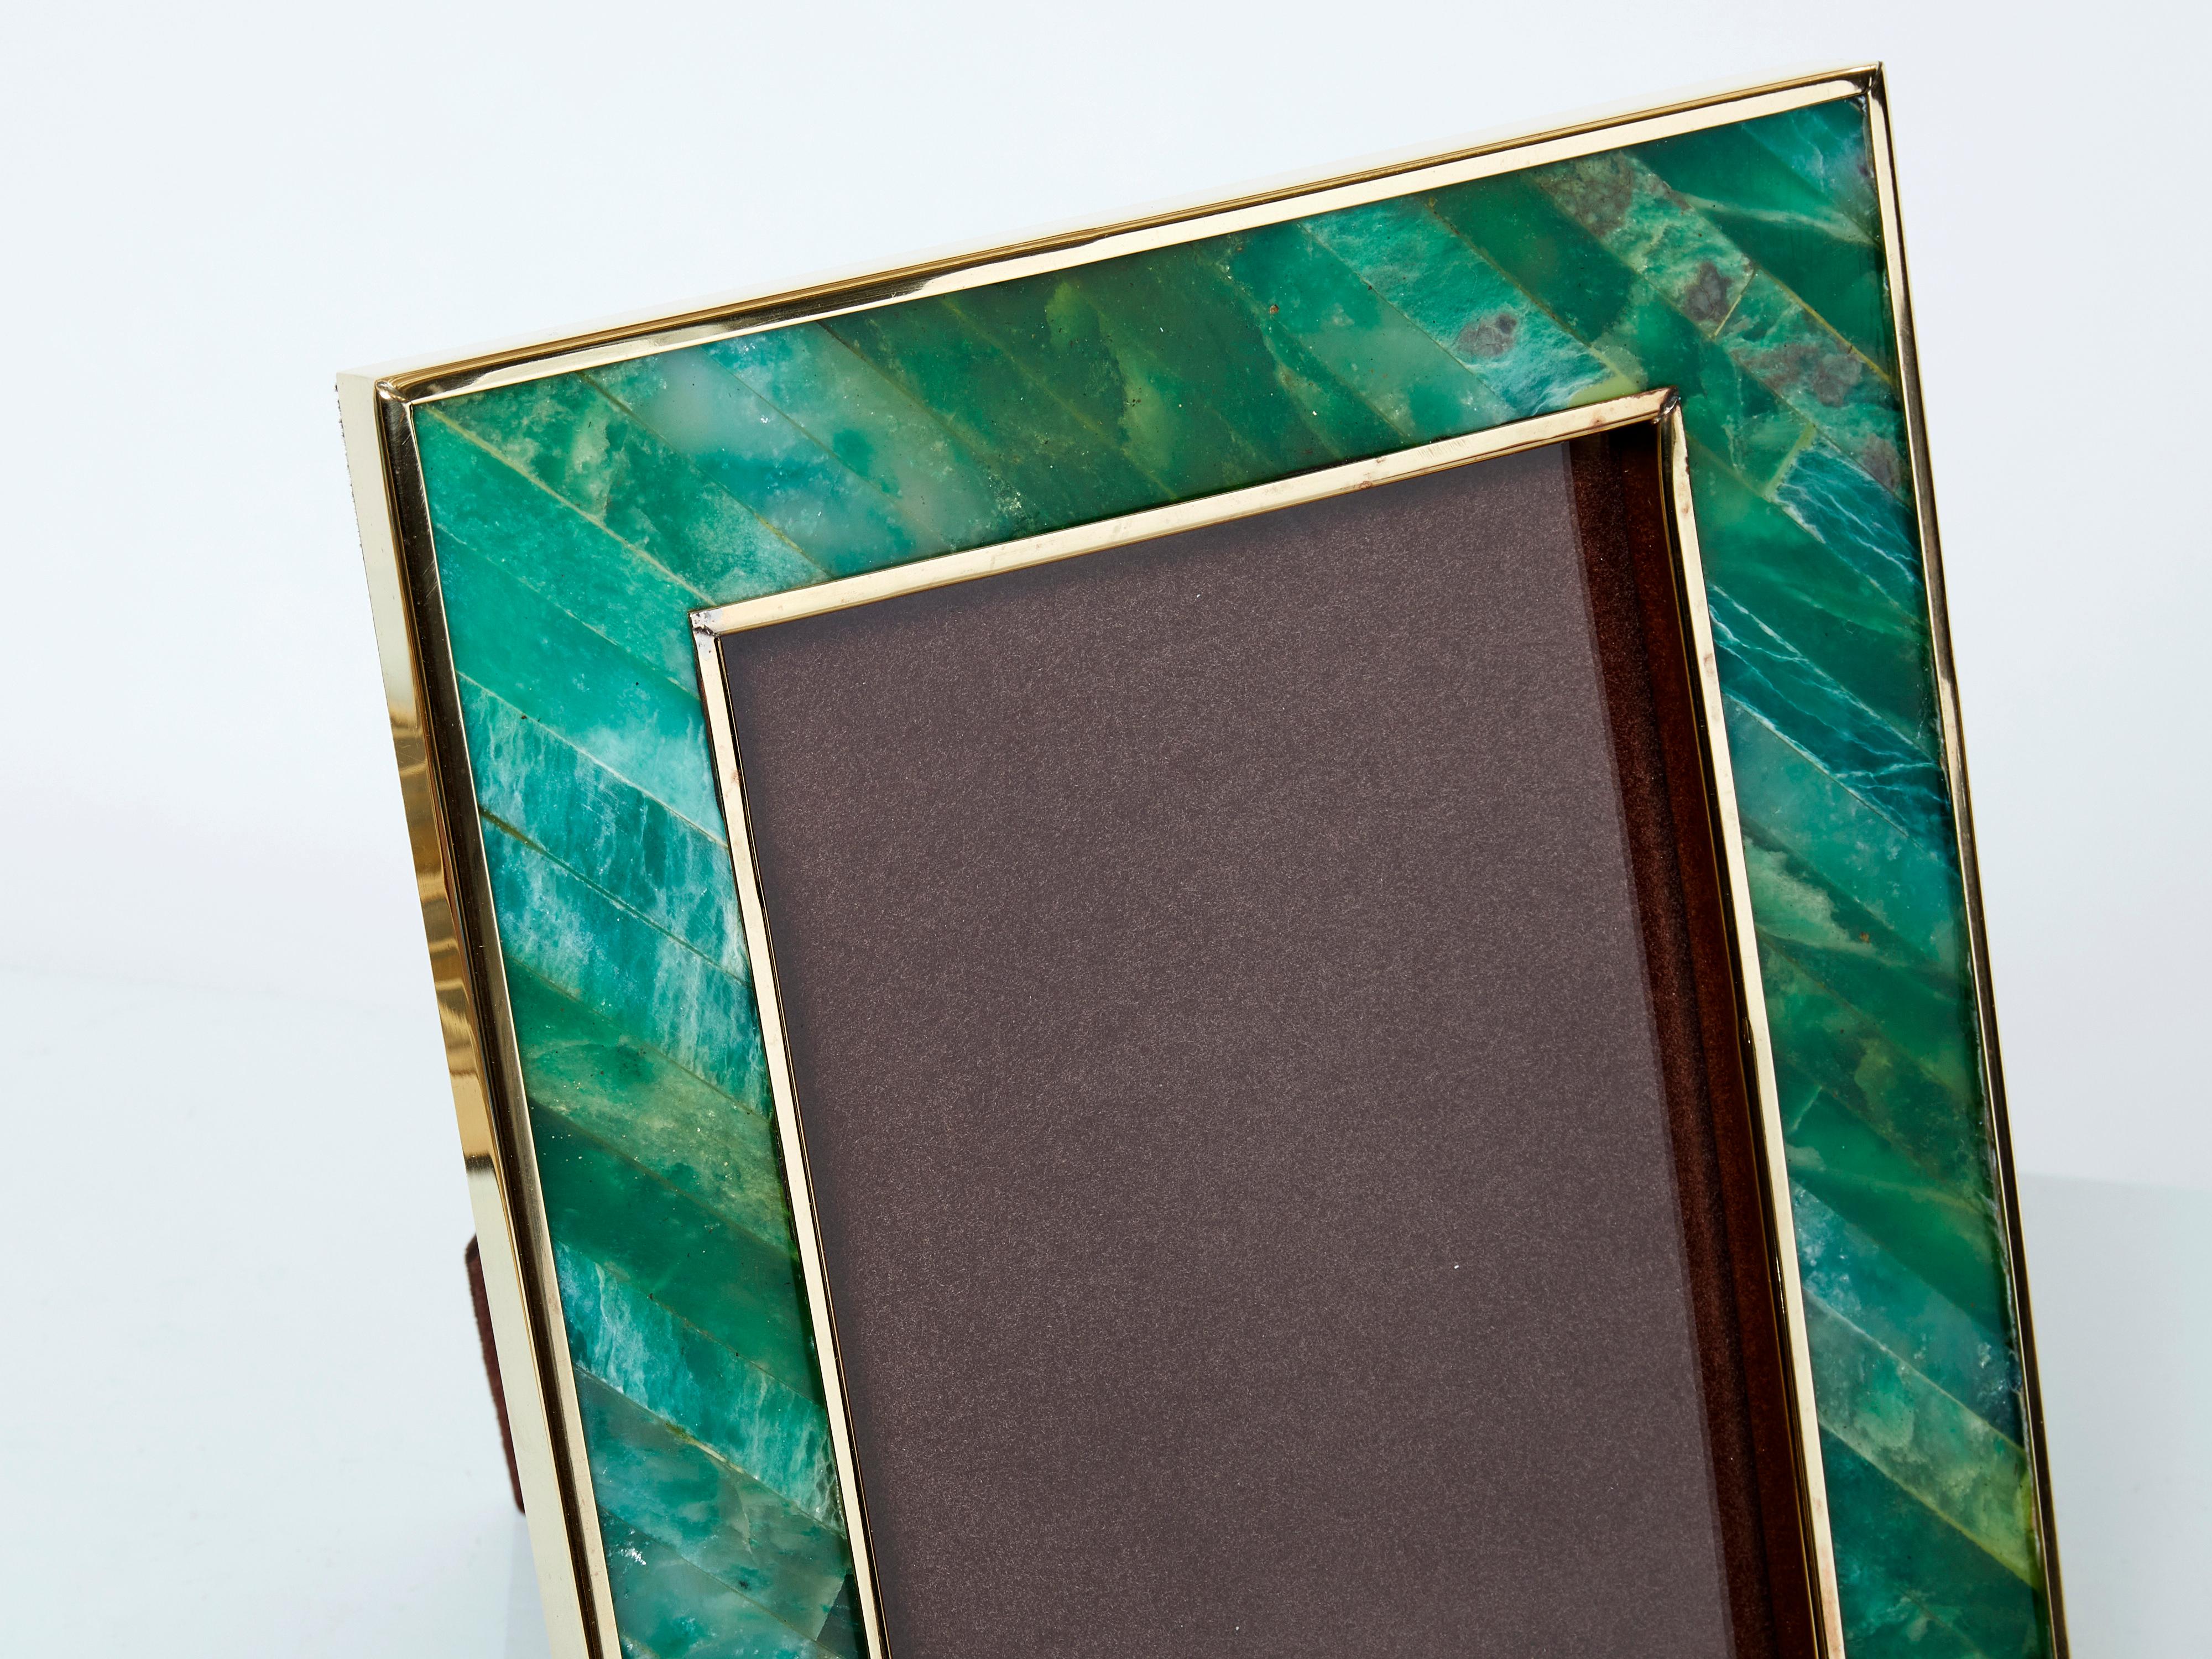 Beautiful mid-century picture frame made in Italy in the late 1970s. This brass frame is covered by malachite marquetry, with brown velvet on the back. The mix of brass and malachite is really nice, and typical of the lavish 1970s Italian style. A